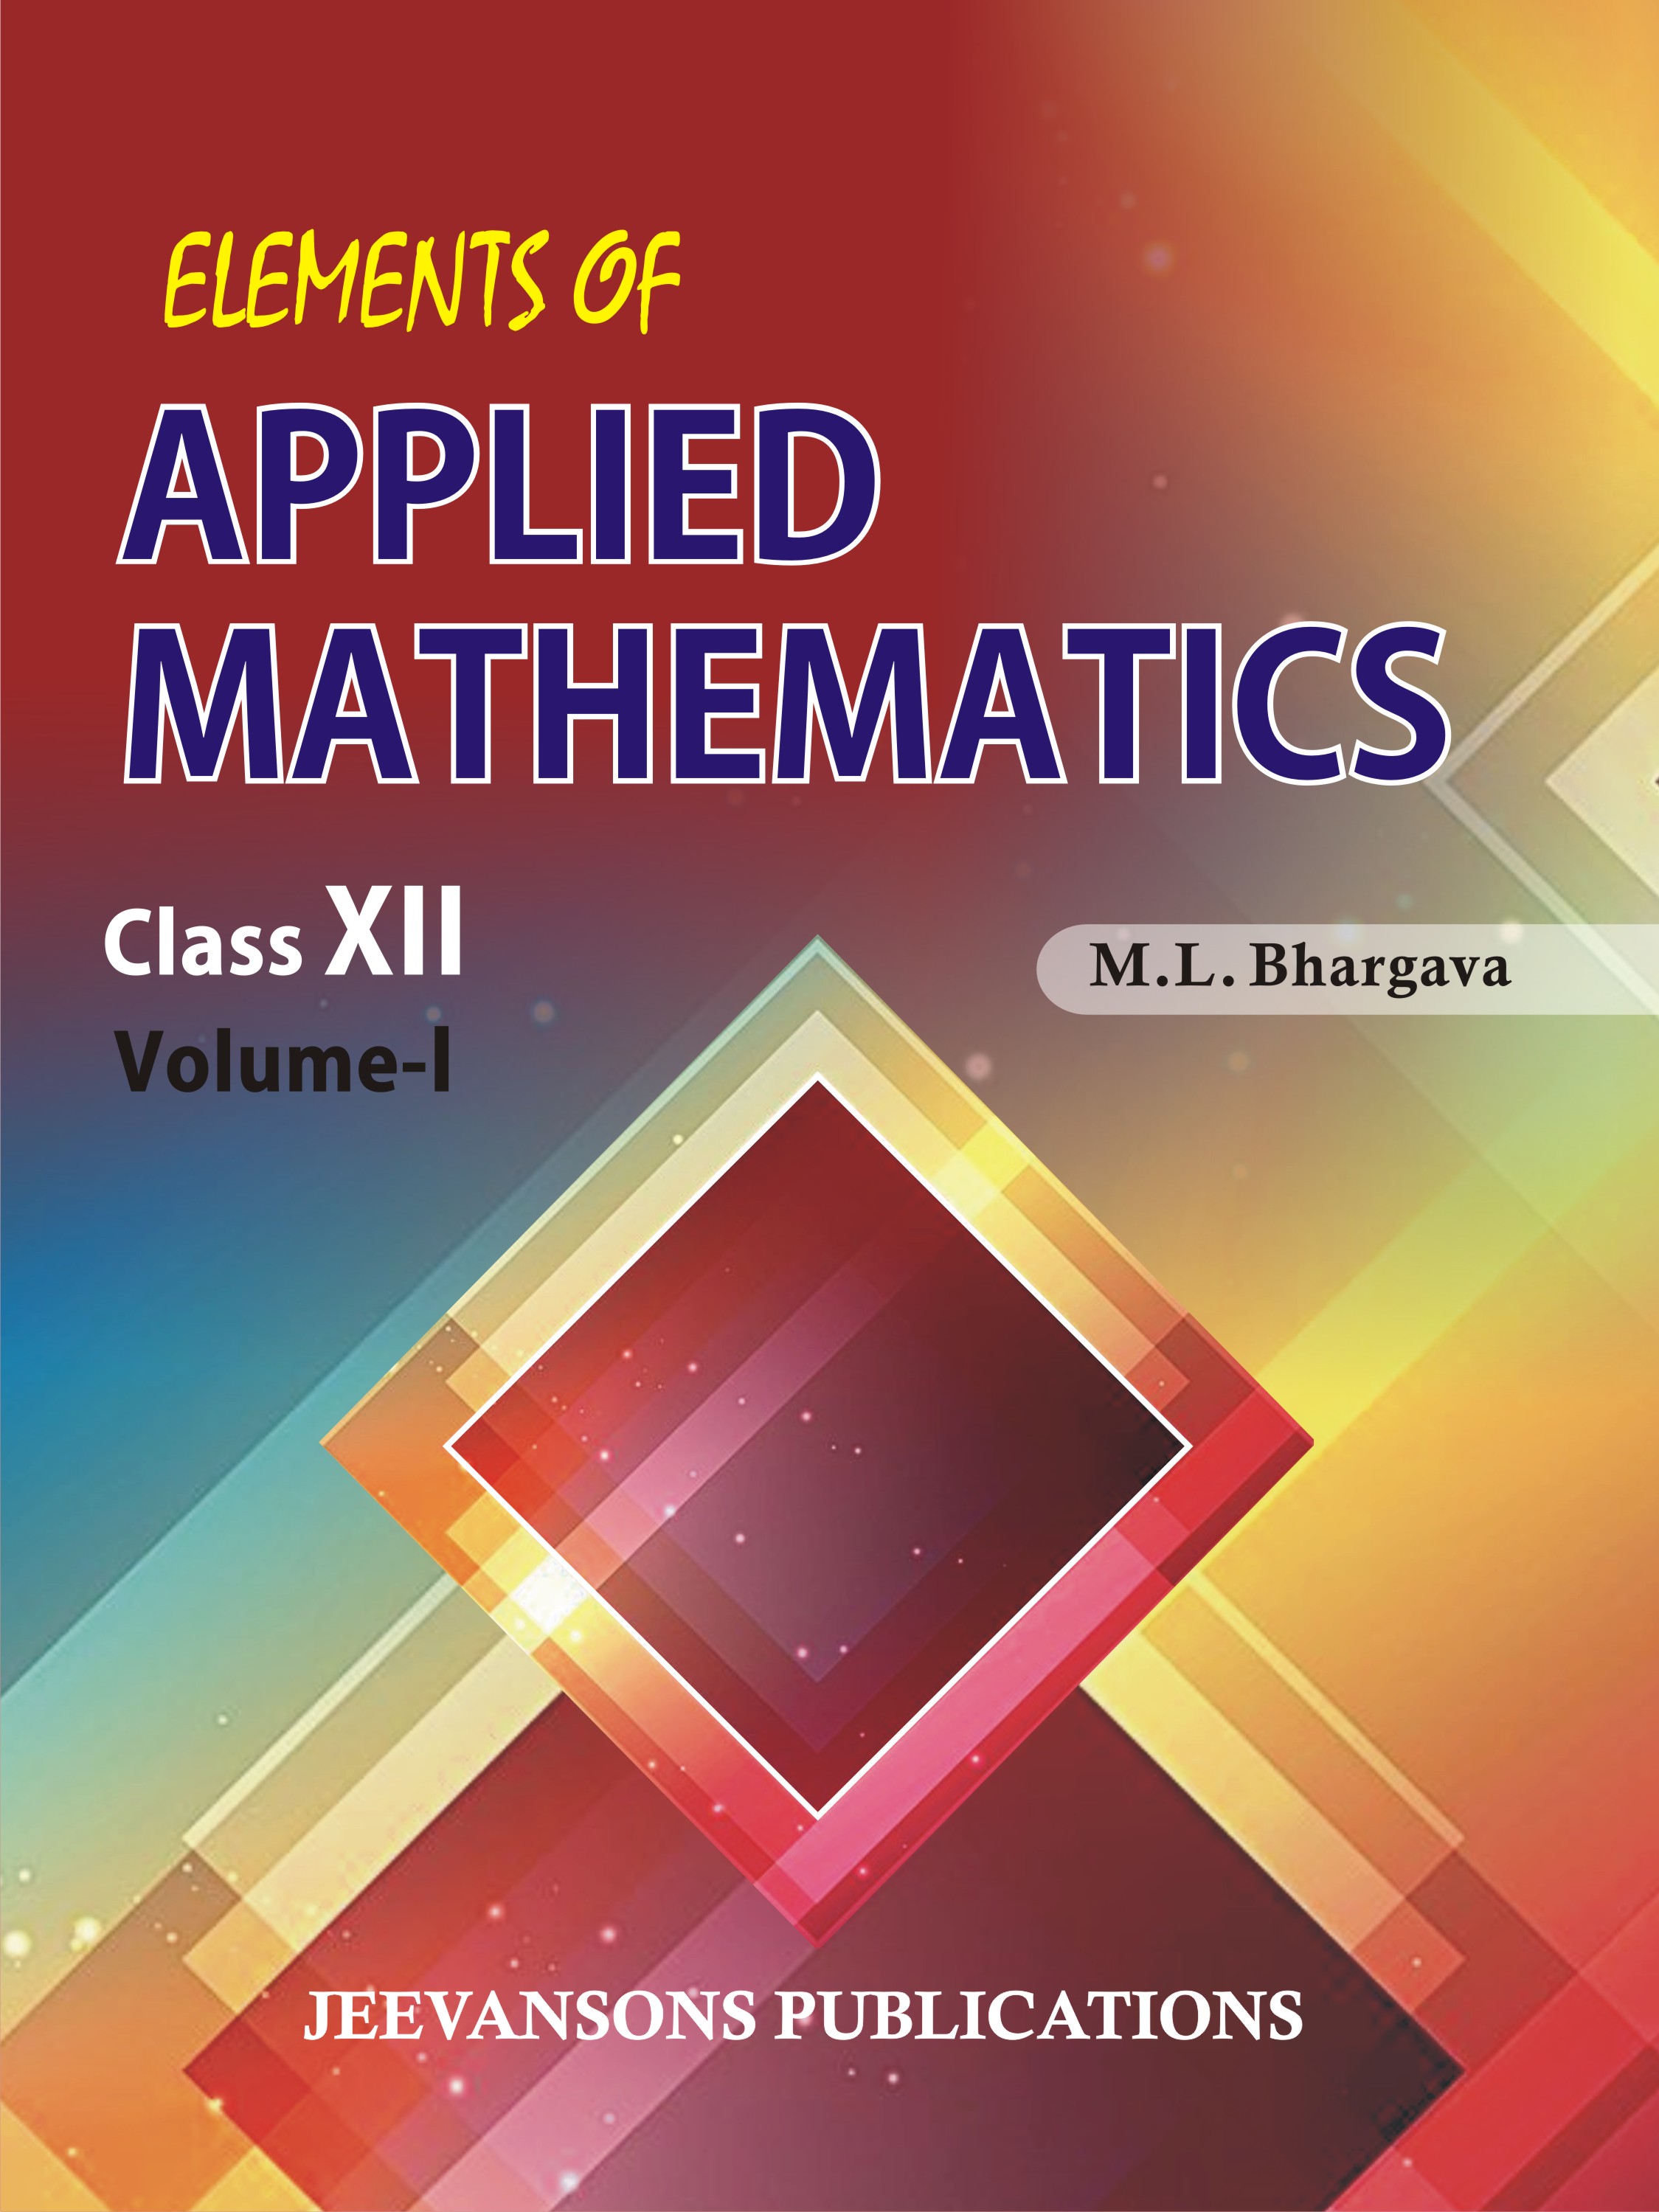 buy-elements-of-applied-mathematics-for-class-xii-vol-i-online-get